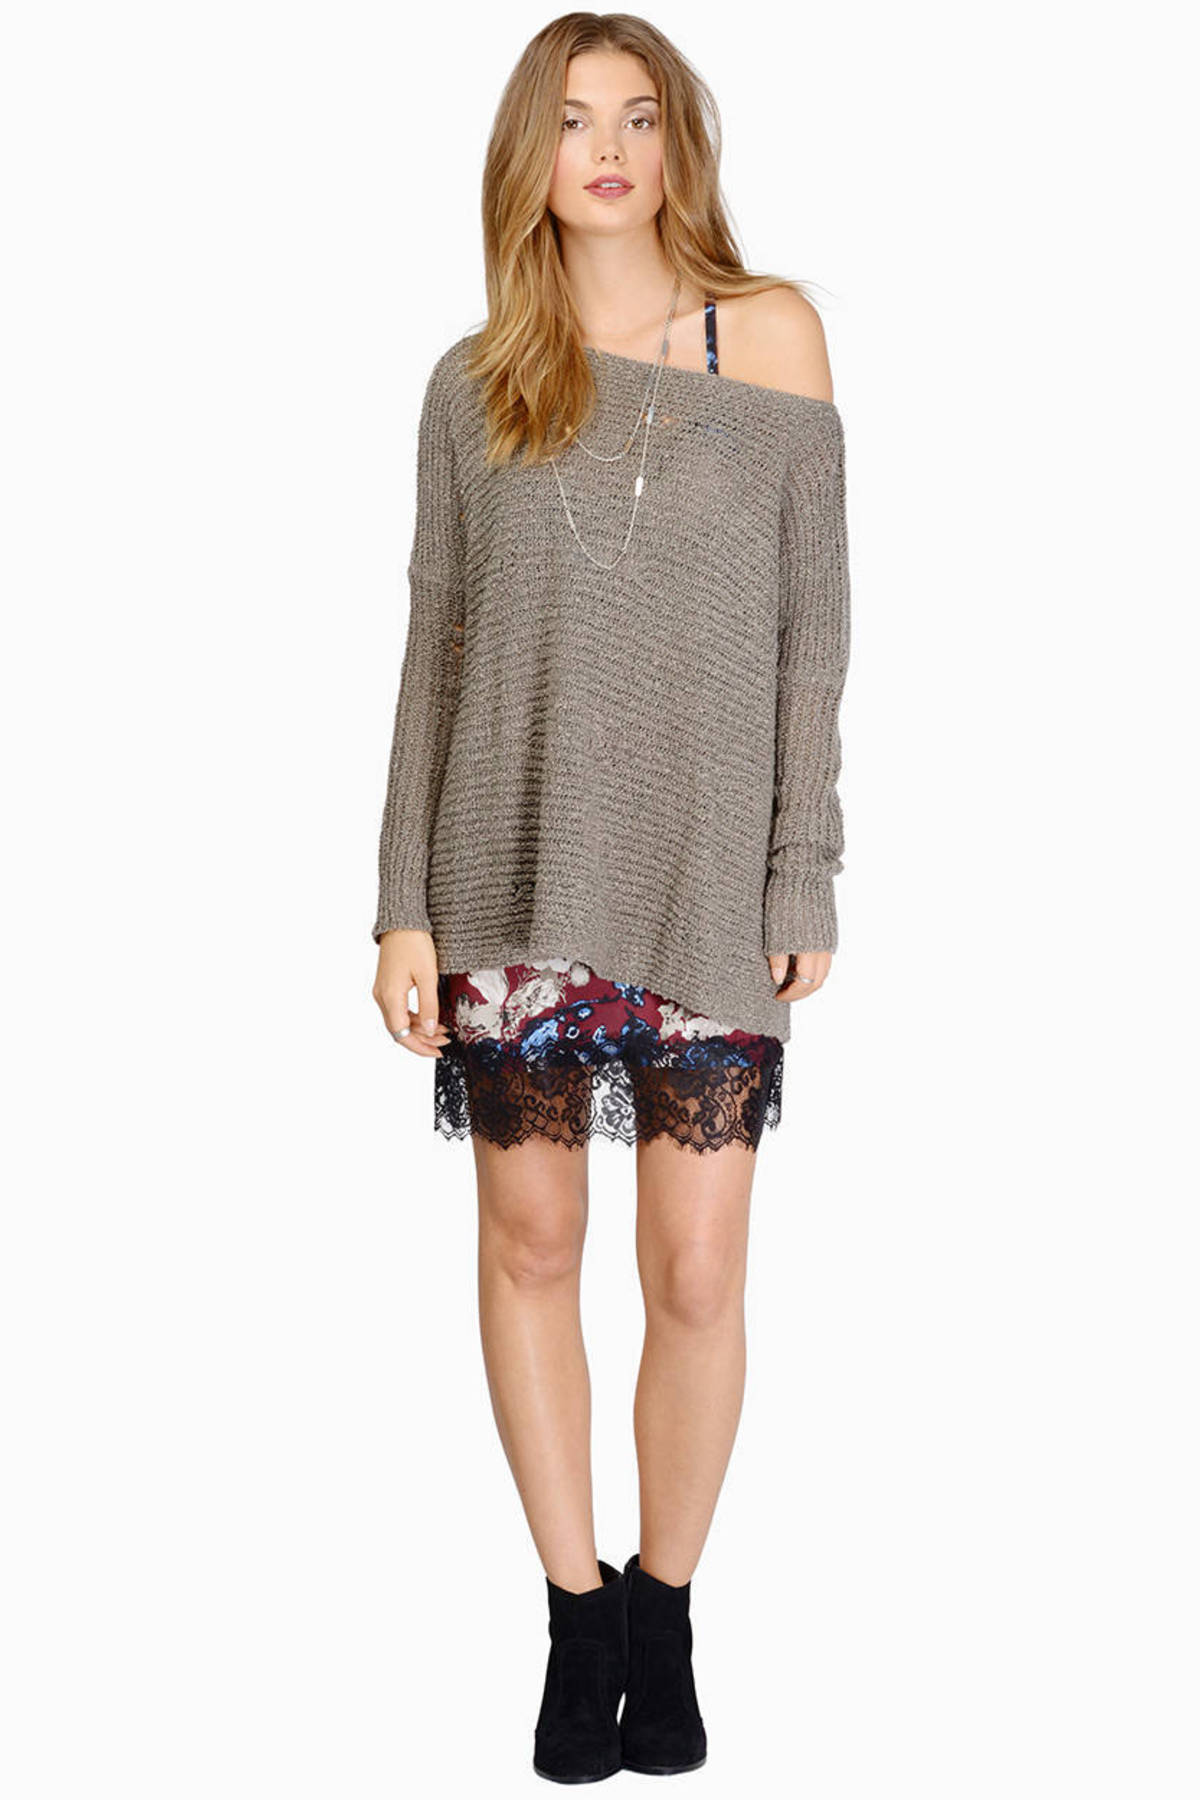 Getting Knitty Sweater in Taupe - $58 | Tobi US